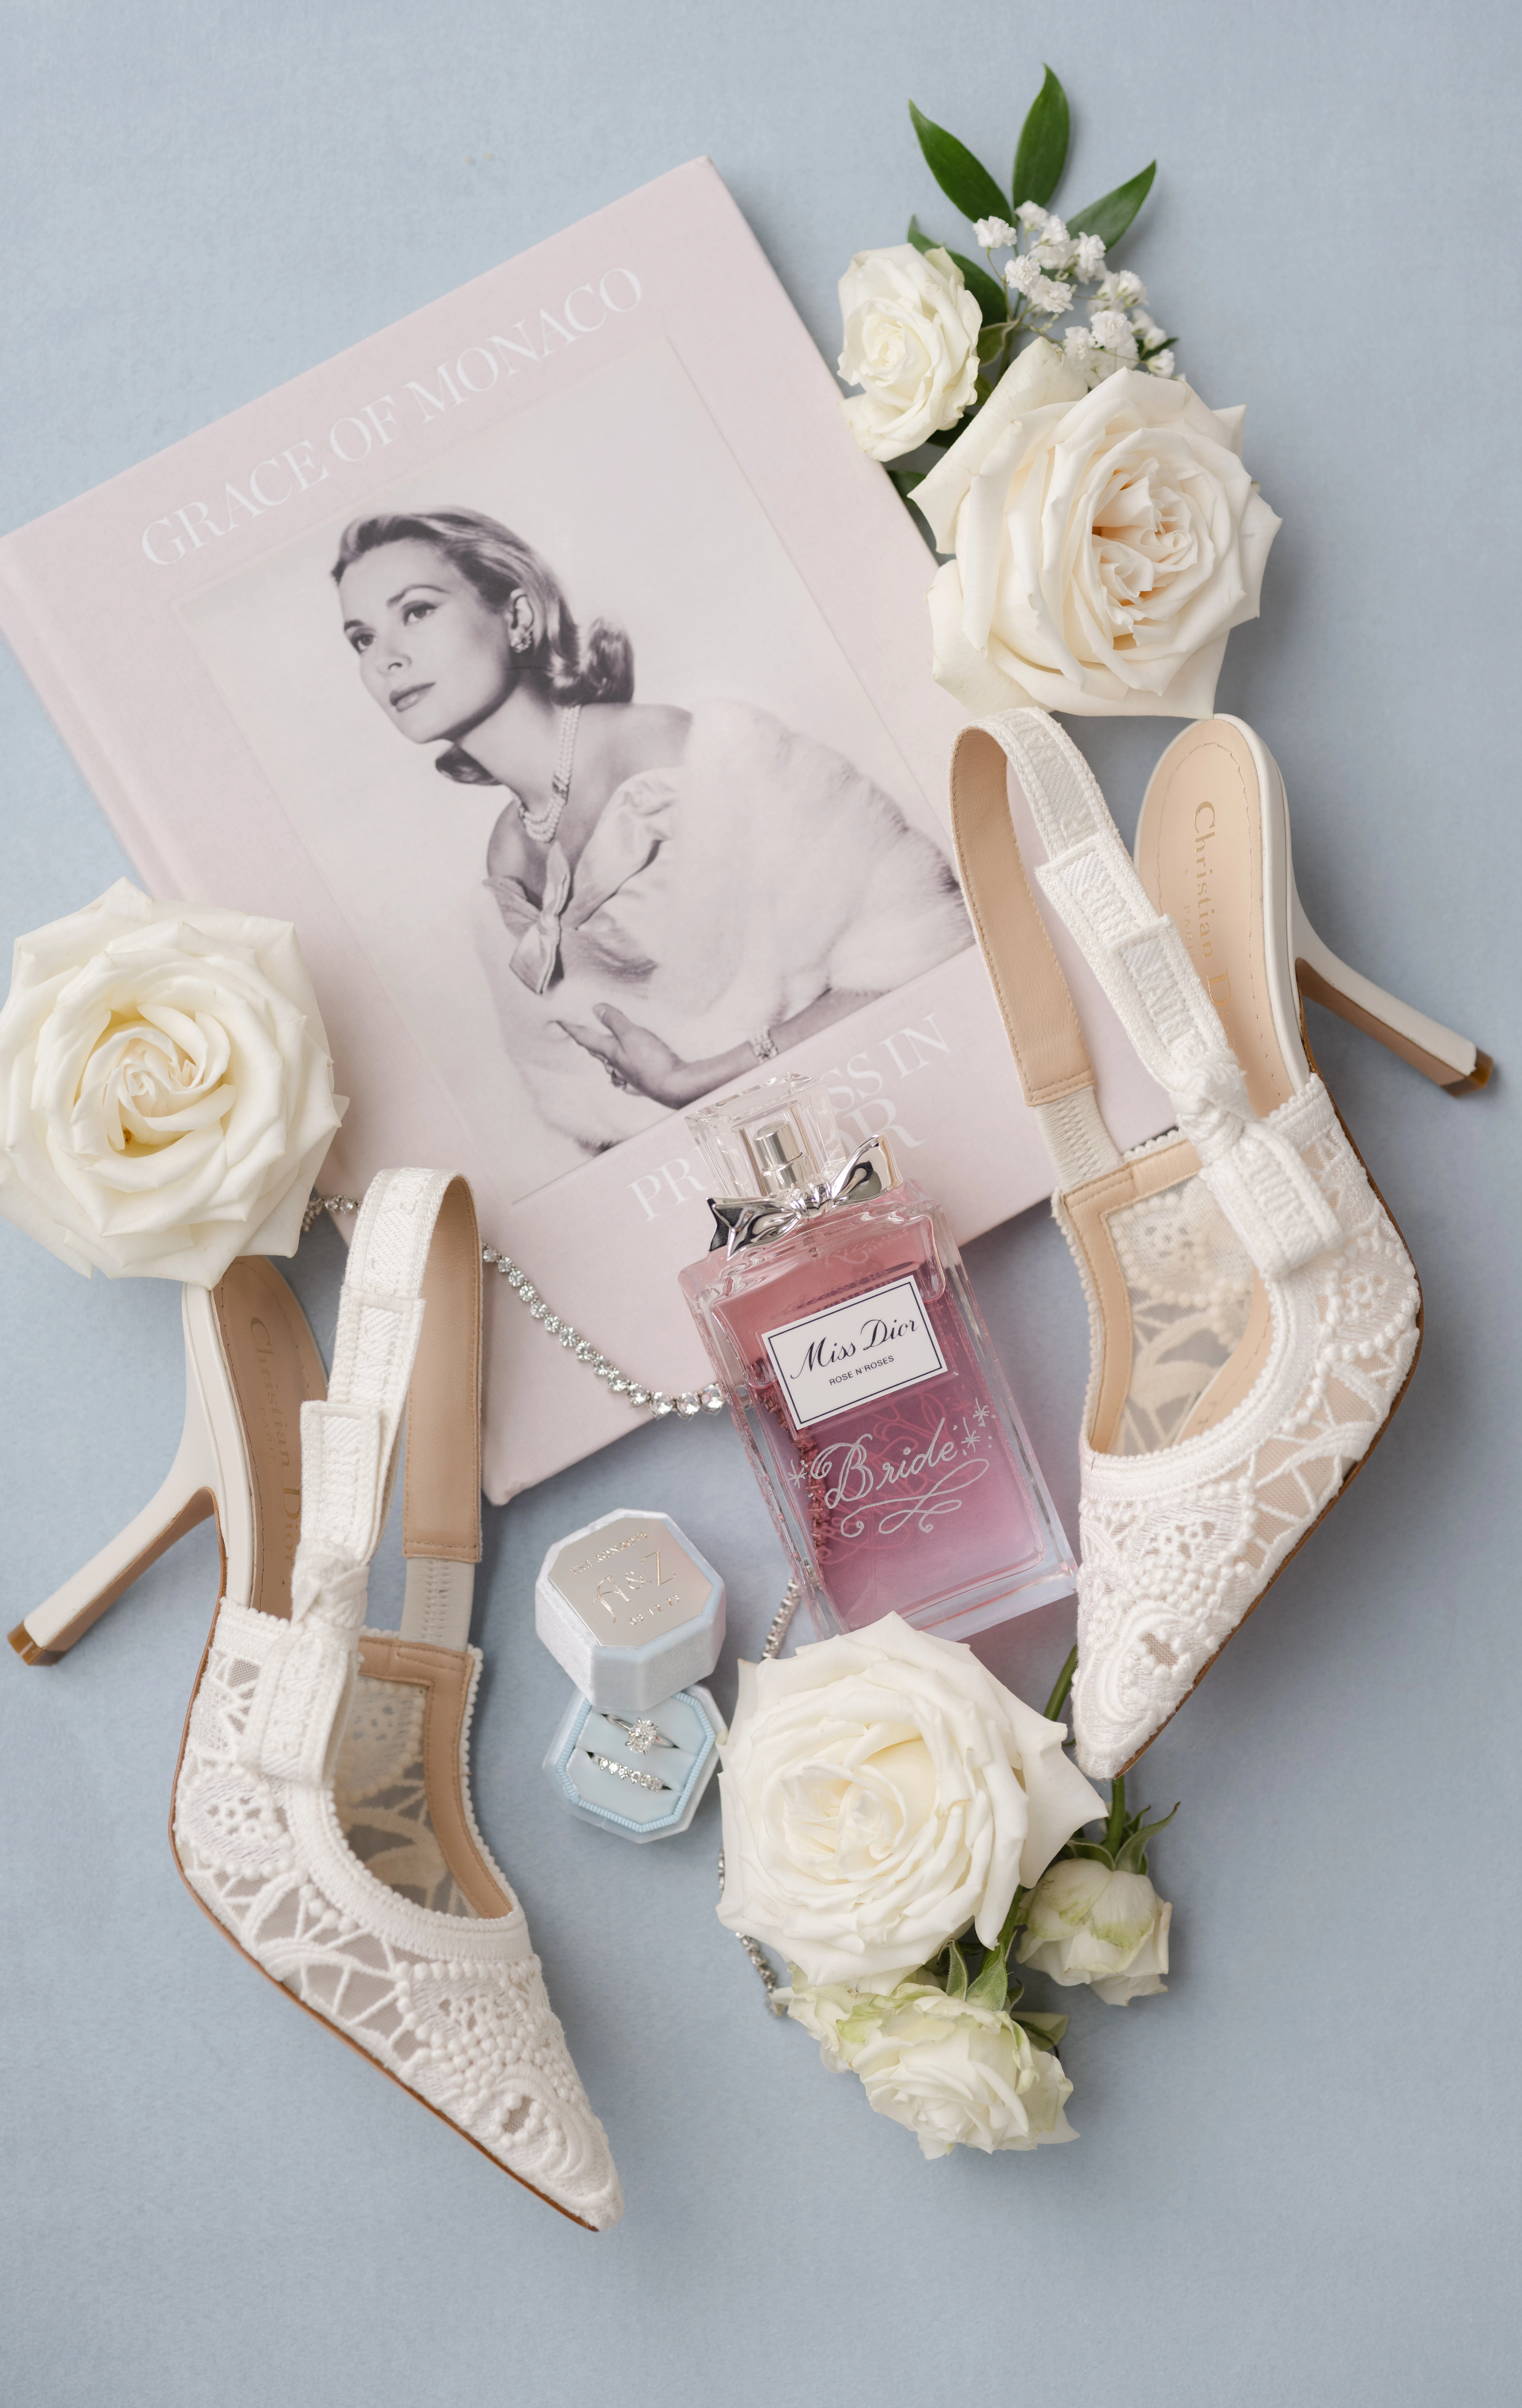 white heels, perfume, a book, rings, and white roses arrangement on a light blue surface